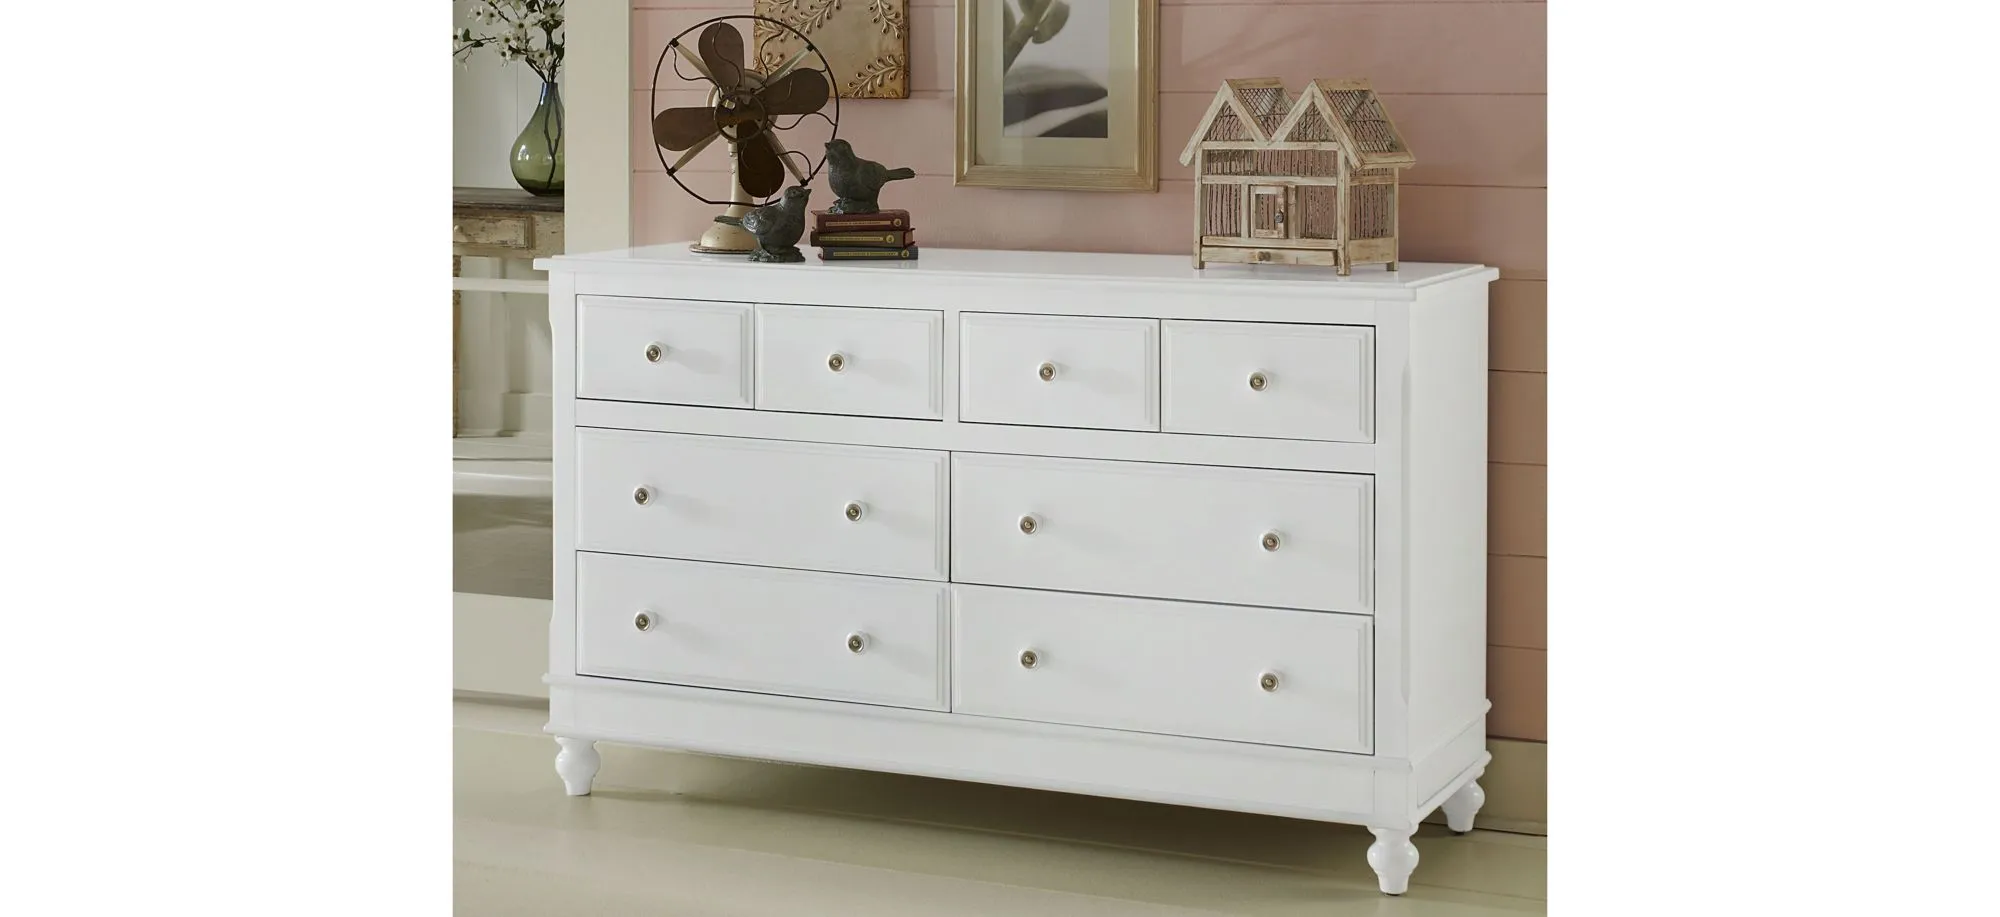 Lake House 8 Drawer Dresser in White by Hillsdale Furniture